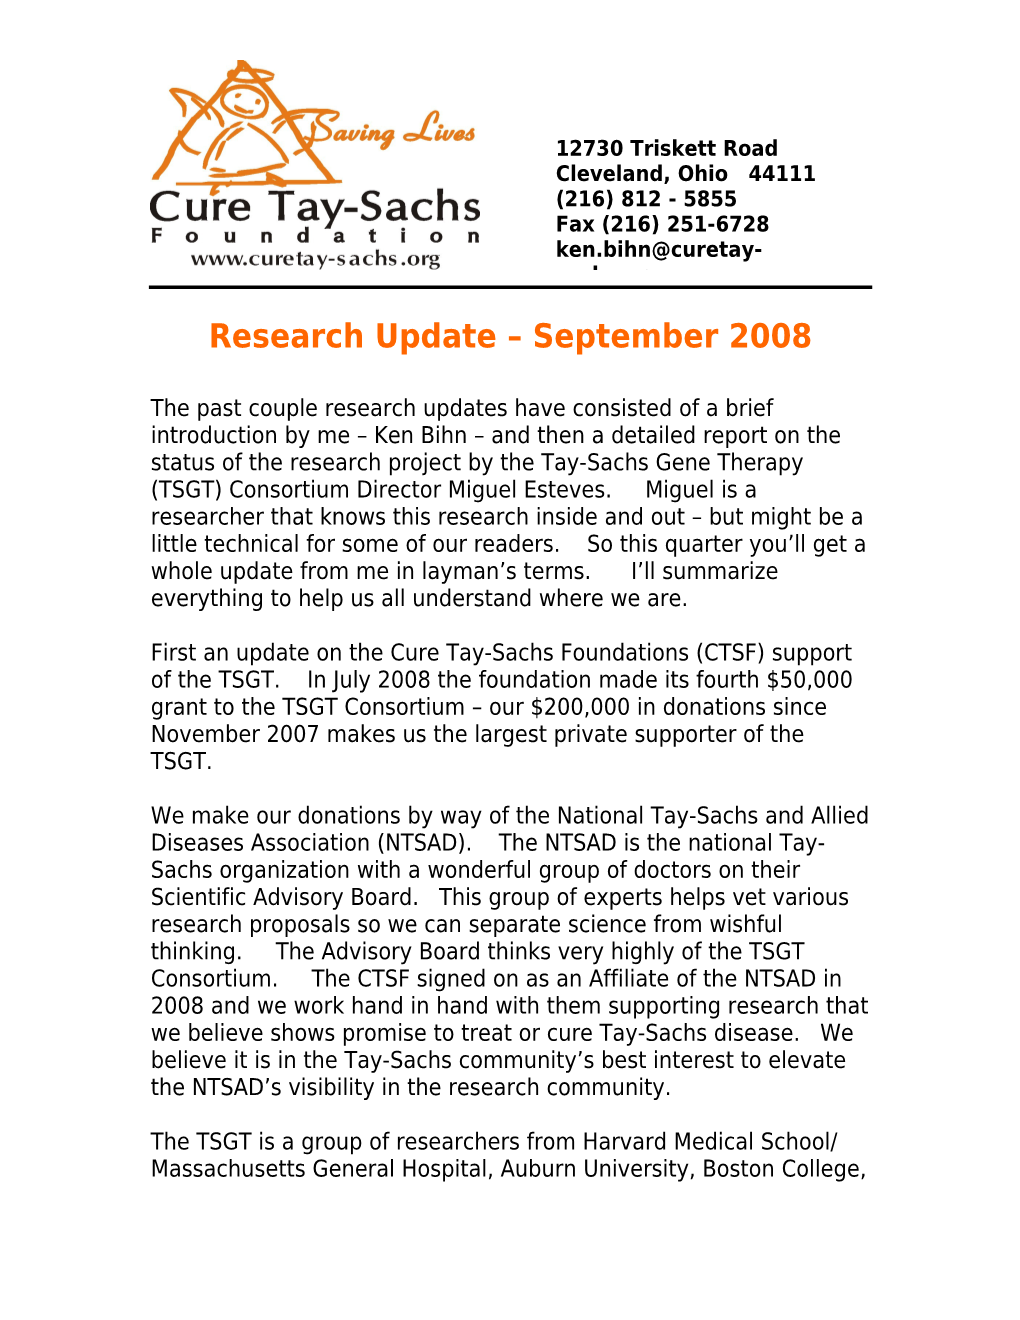 Research Update September 2008